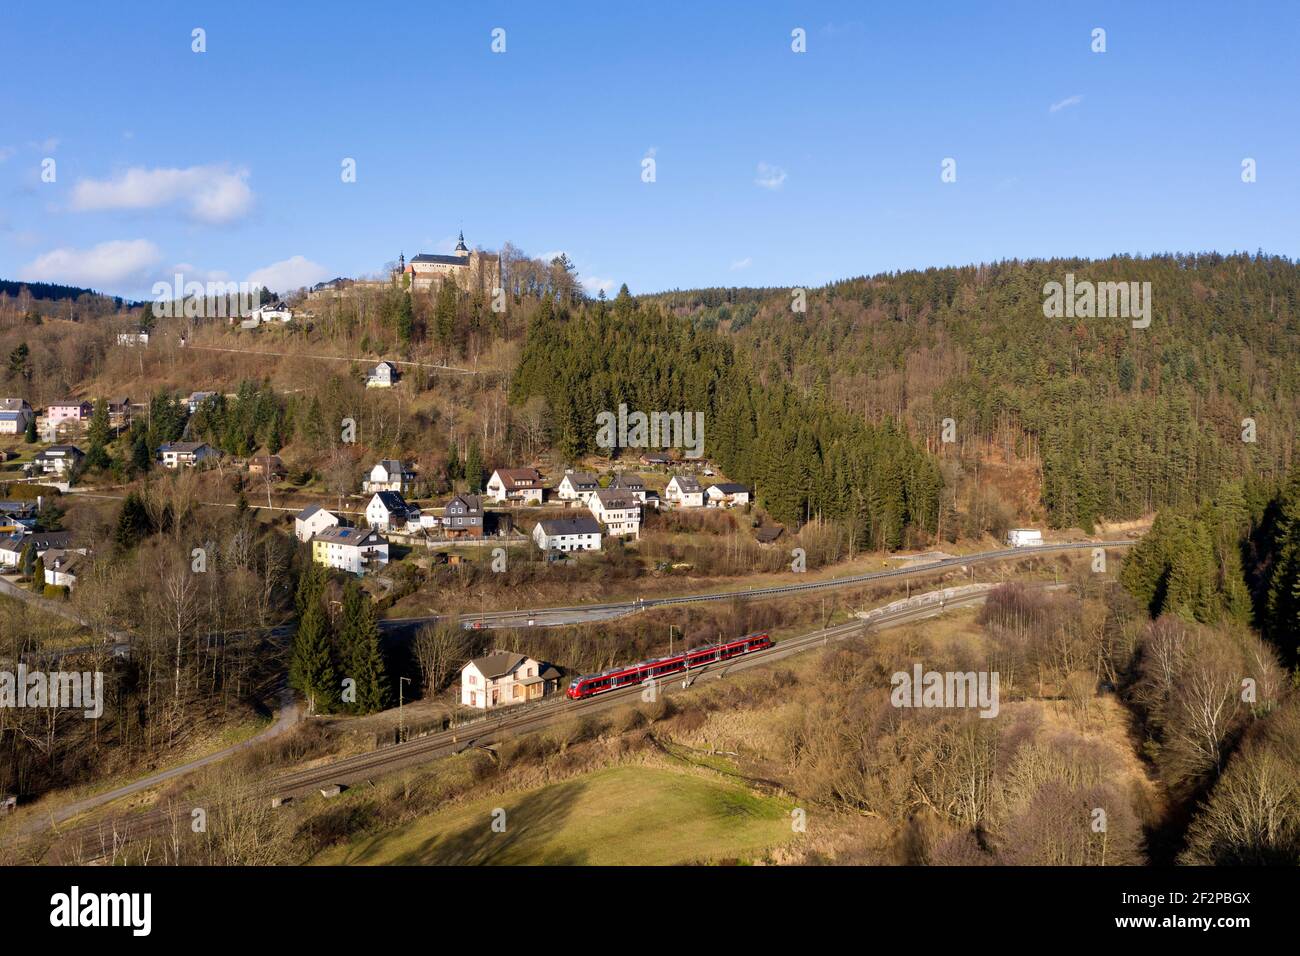 Germany, Bavaria, Lauenstein, train, forest, landscape, castle, houses, aerial view Stock Photo